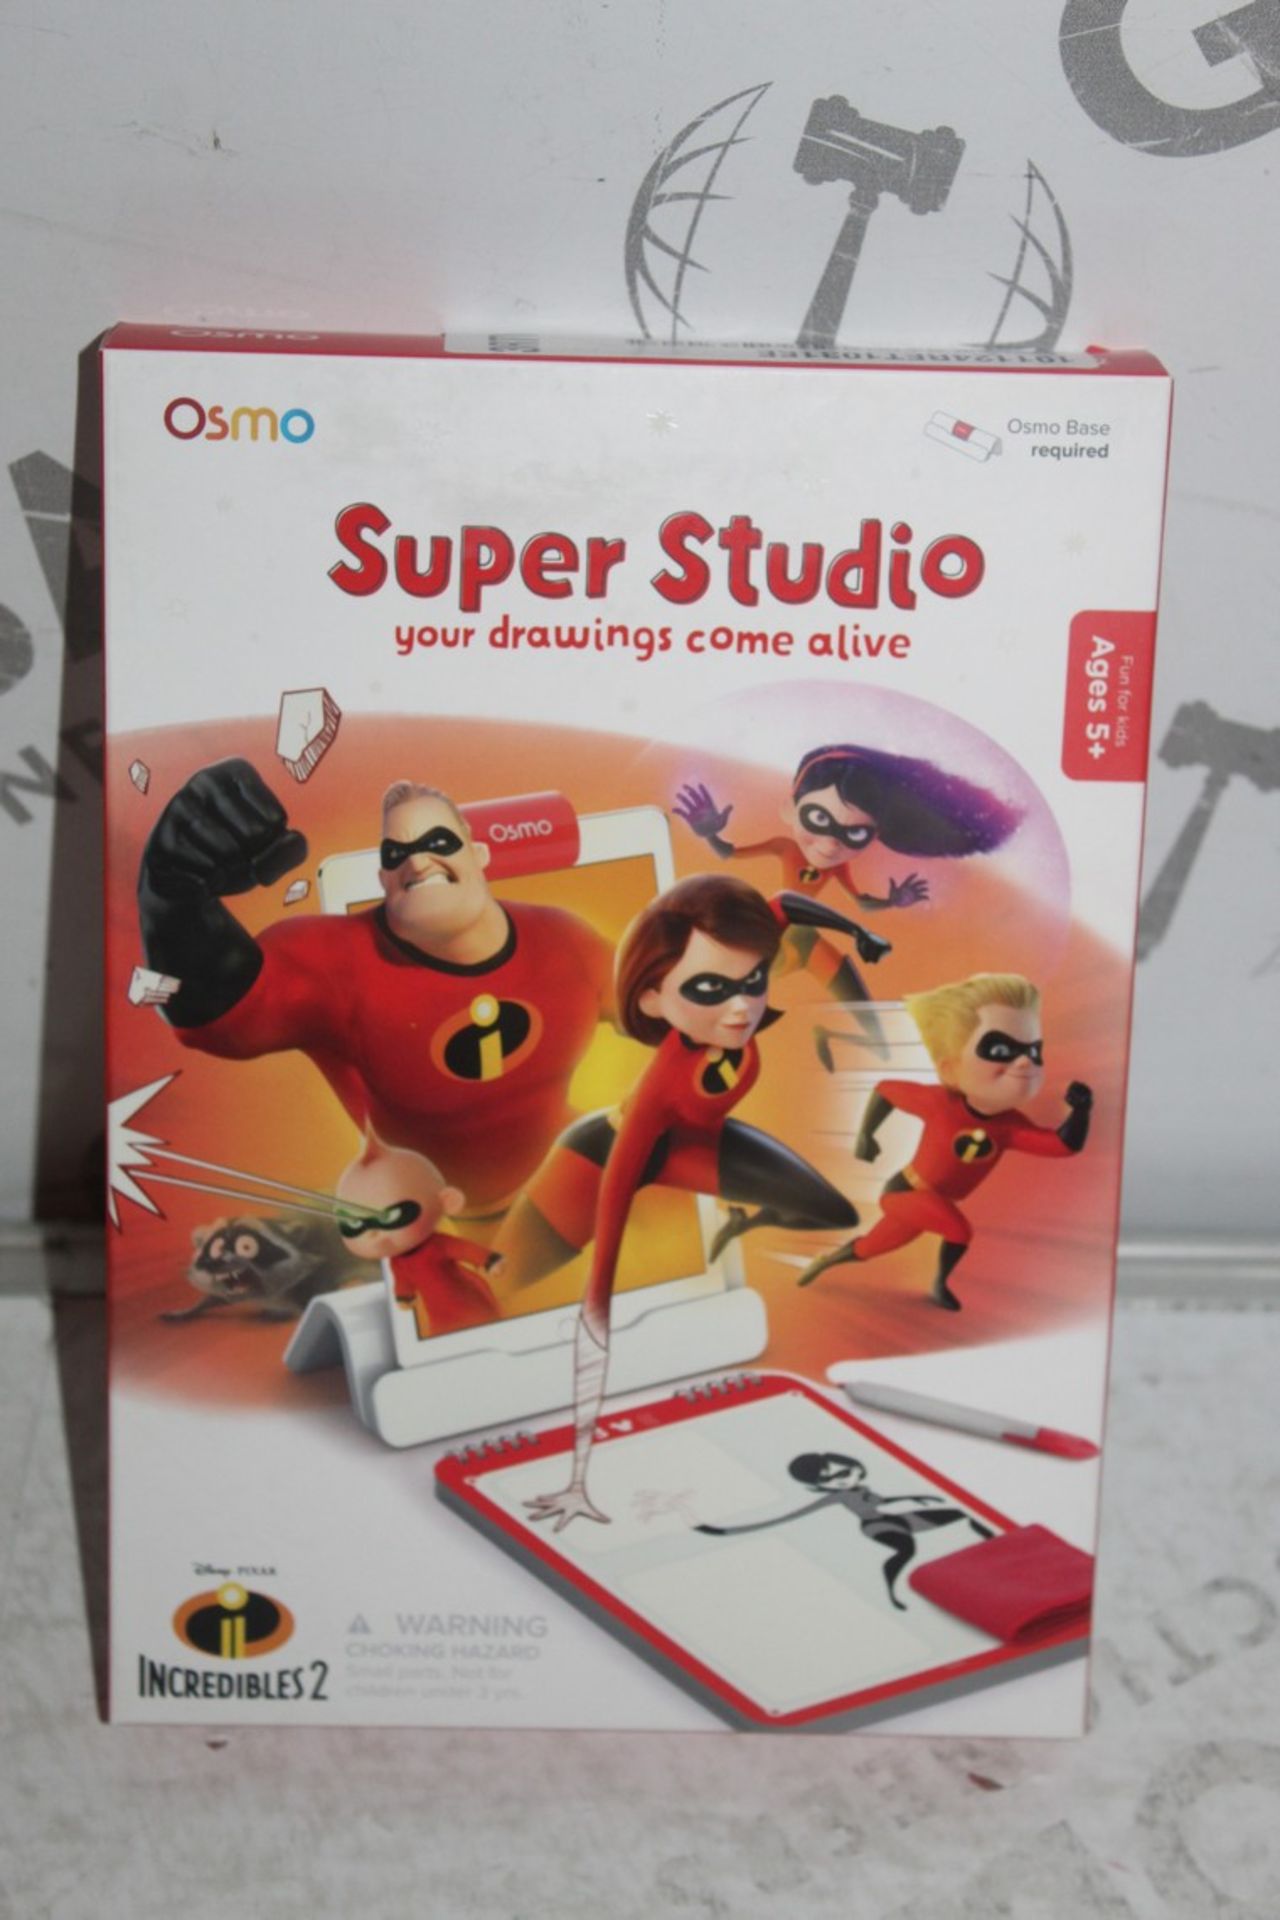 Lot to Contain 5 Osmo Super Studio Drawings Come to Life Incredibles 2 Interactive Games Combined